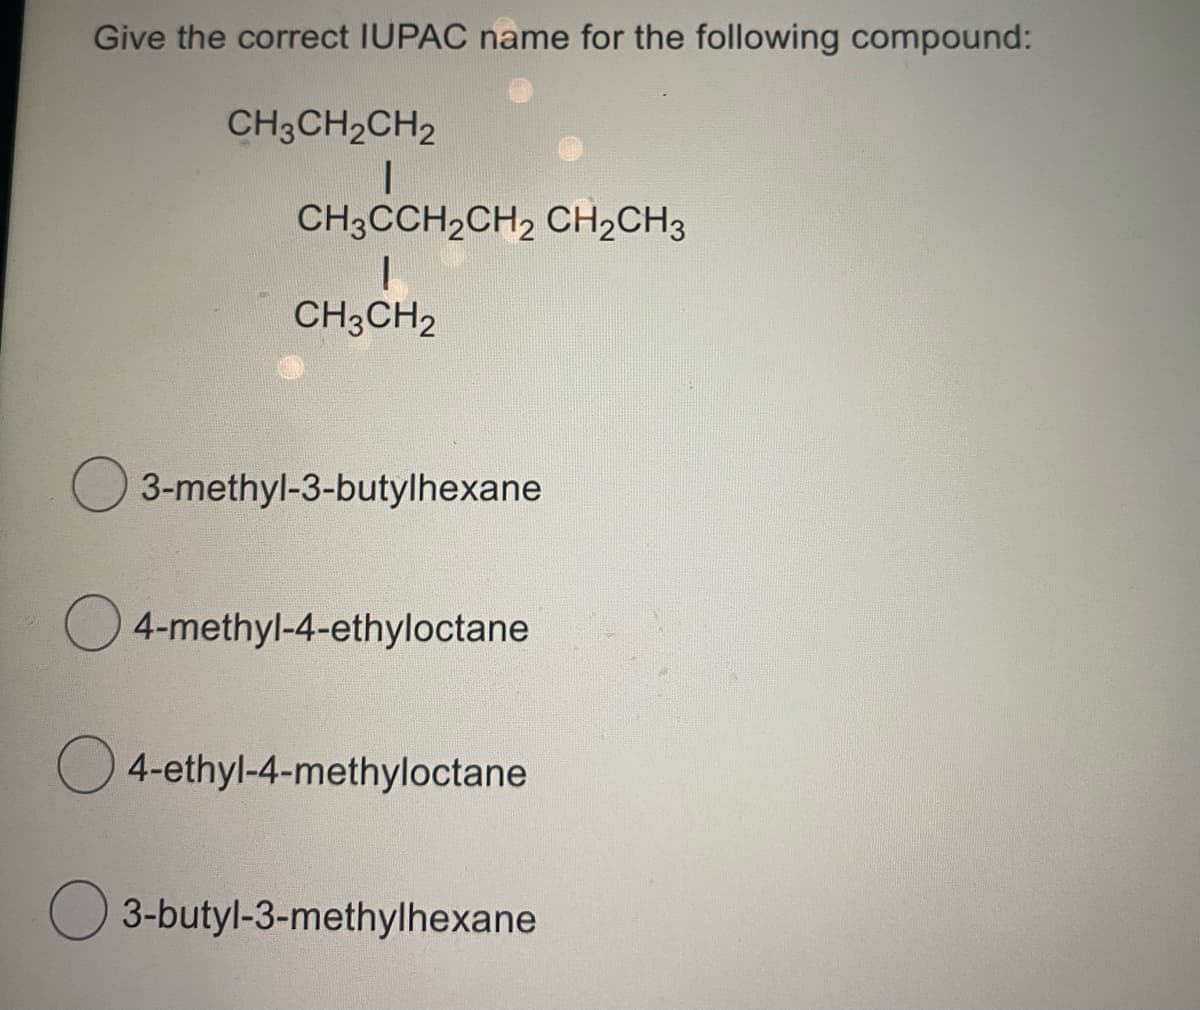 Give the correct IUPAC name for the following compound:
CH3CH2CH2
CH3CCH2CH2 CH2CH3
CH3CH2
3-methyl-3-butylhexane
O 4-methyl-4-ethyloctane
O 4-ethyl-4-methyloctane
O 3-butyl-3-methylhexane
